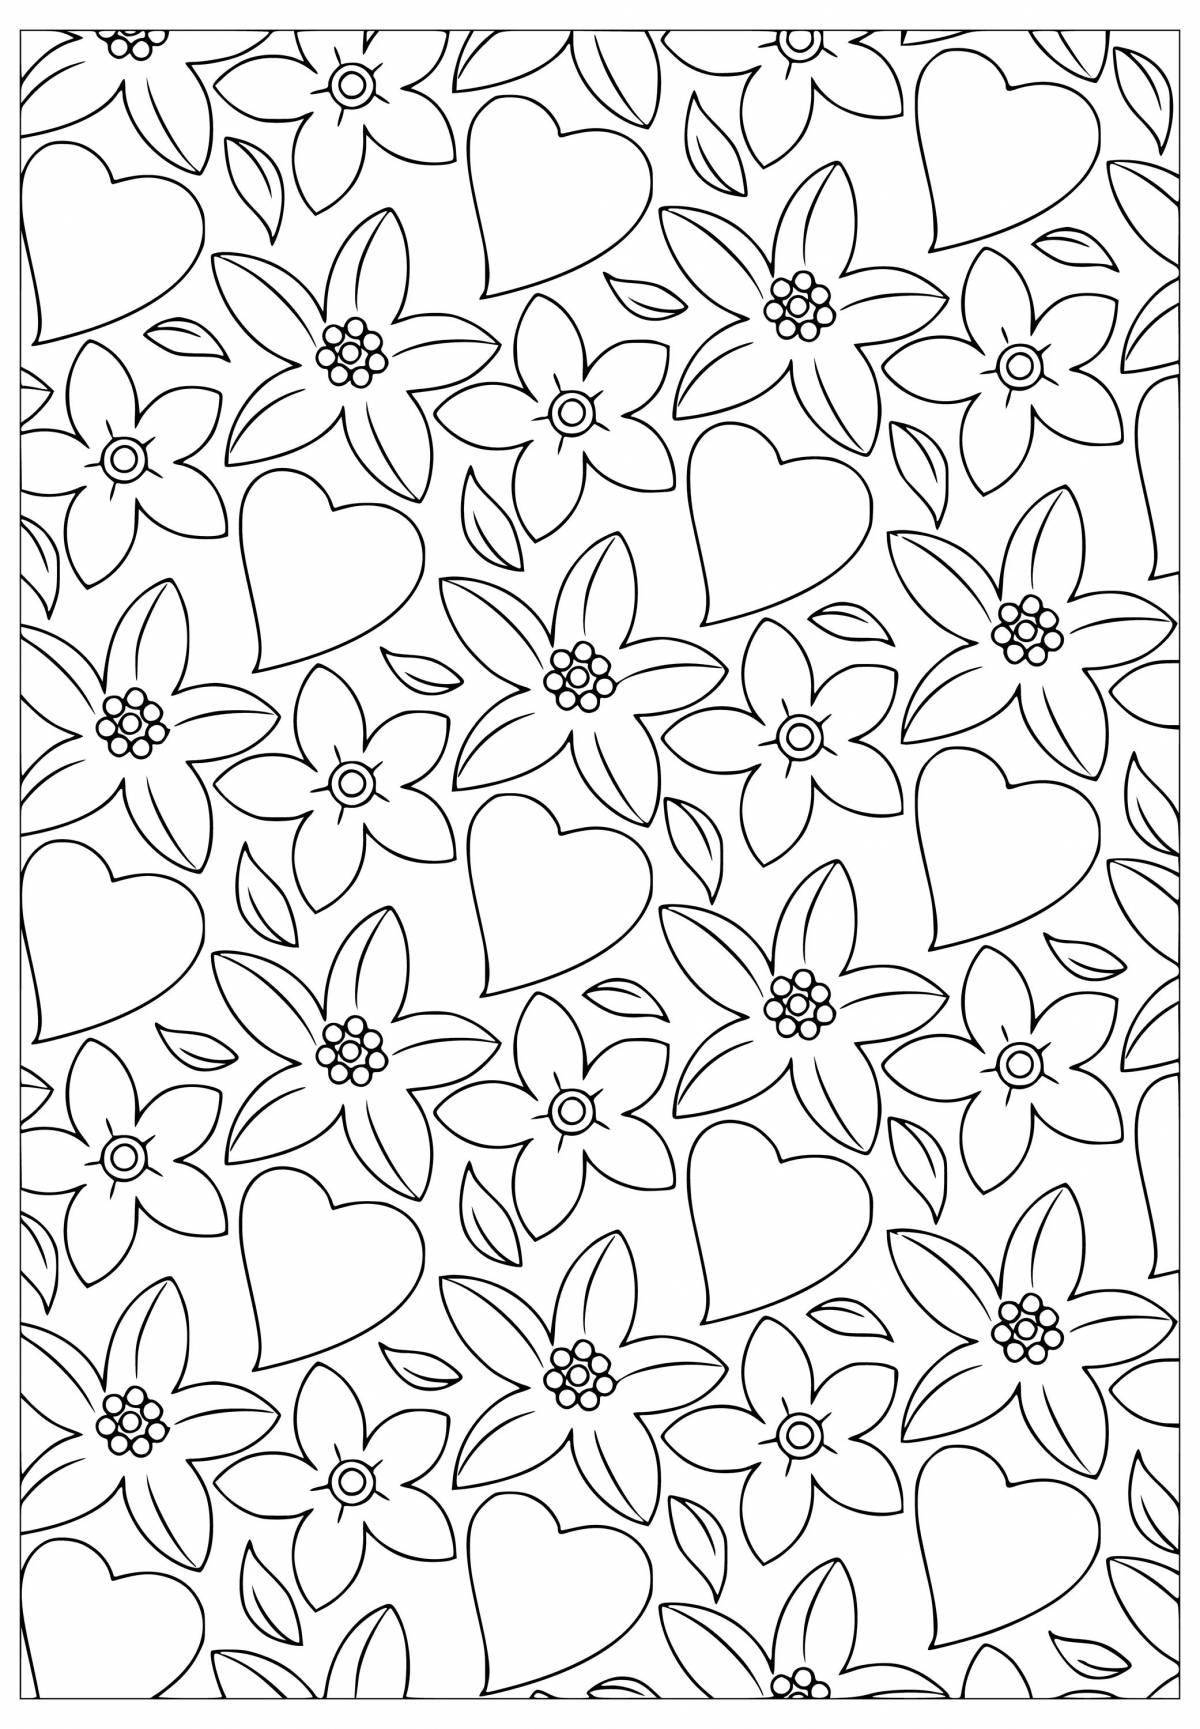 Colorful coloring page background